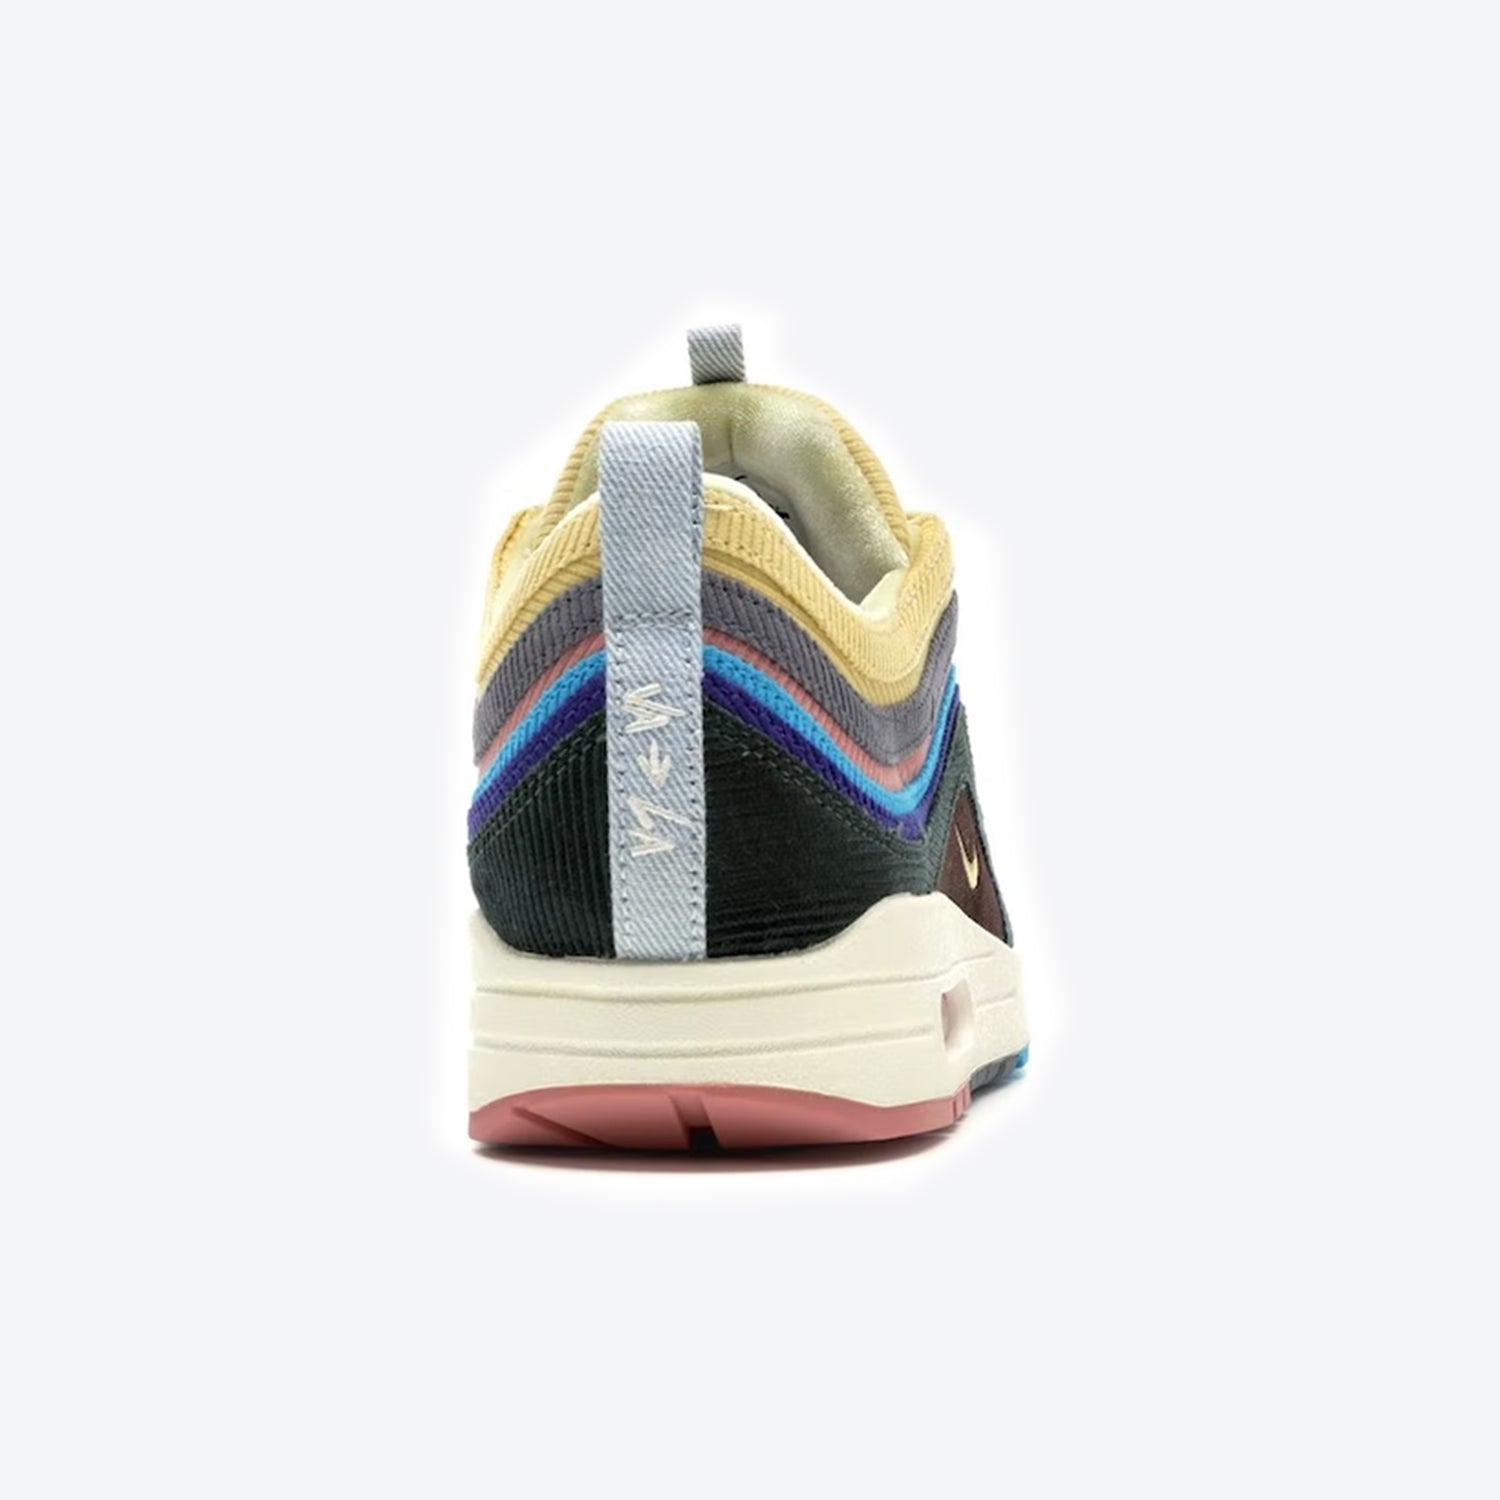 Nike Air Max 1/97 - Sean Wotherspoon (VNDS)